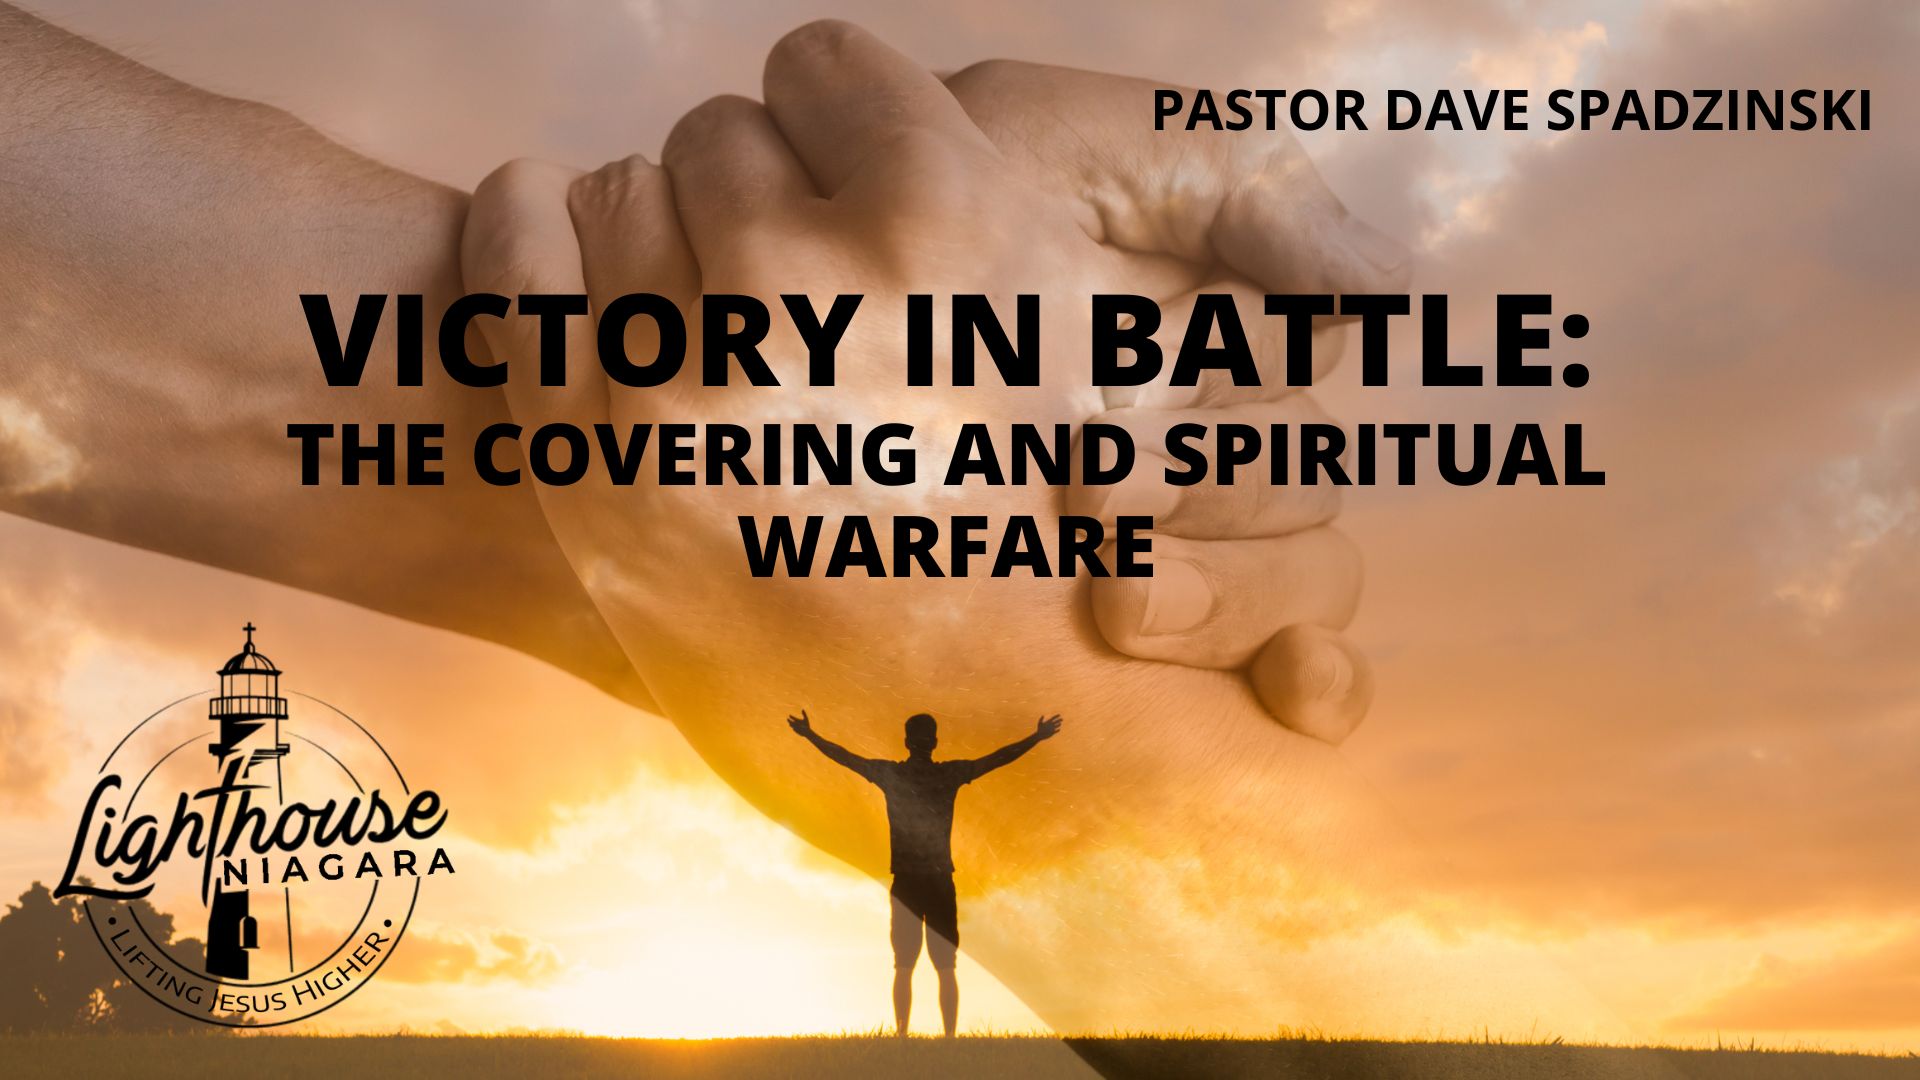 Victory in Battle: The Covering and Spiritual Warfare - Pastor Dave Spadzinski